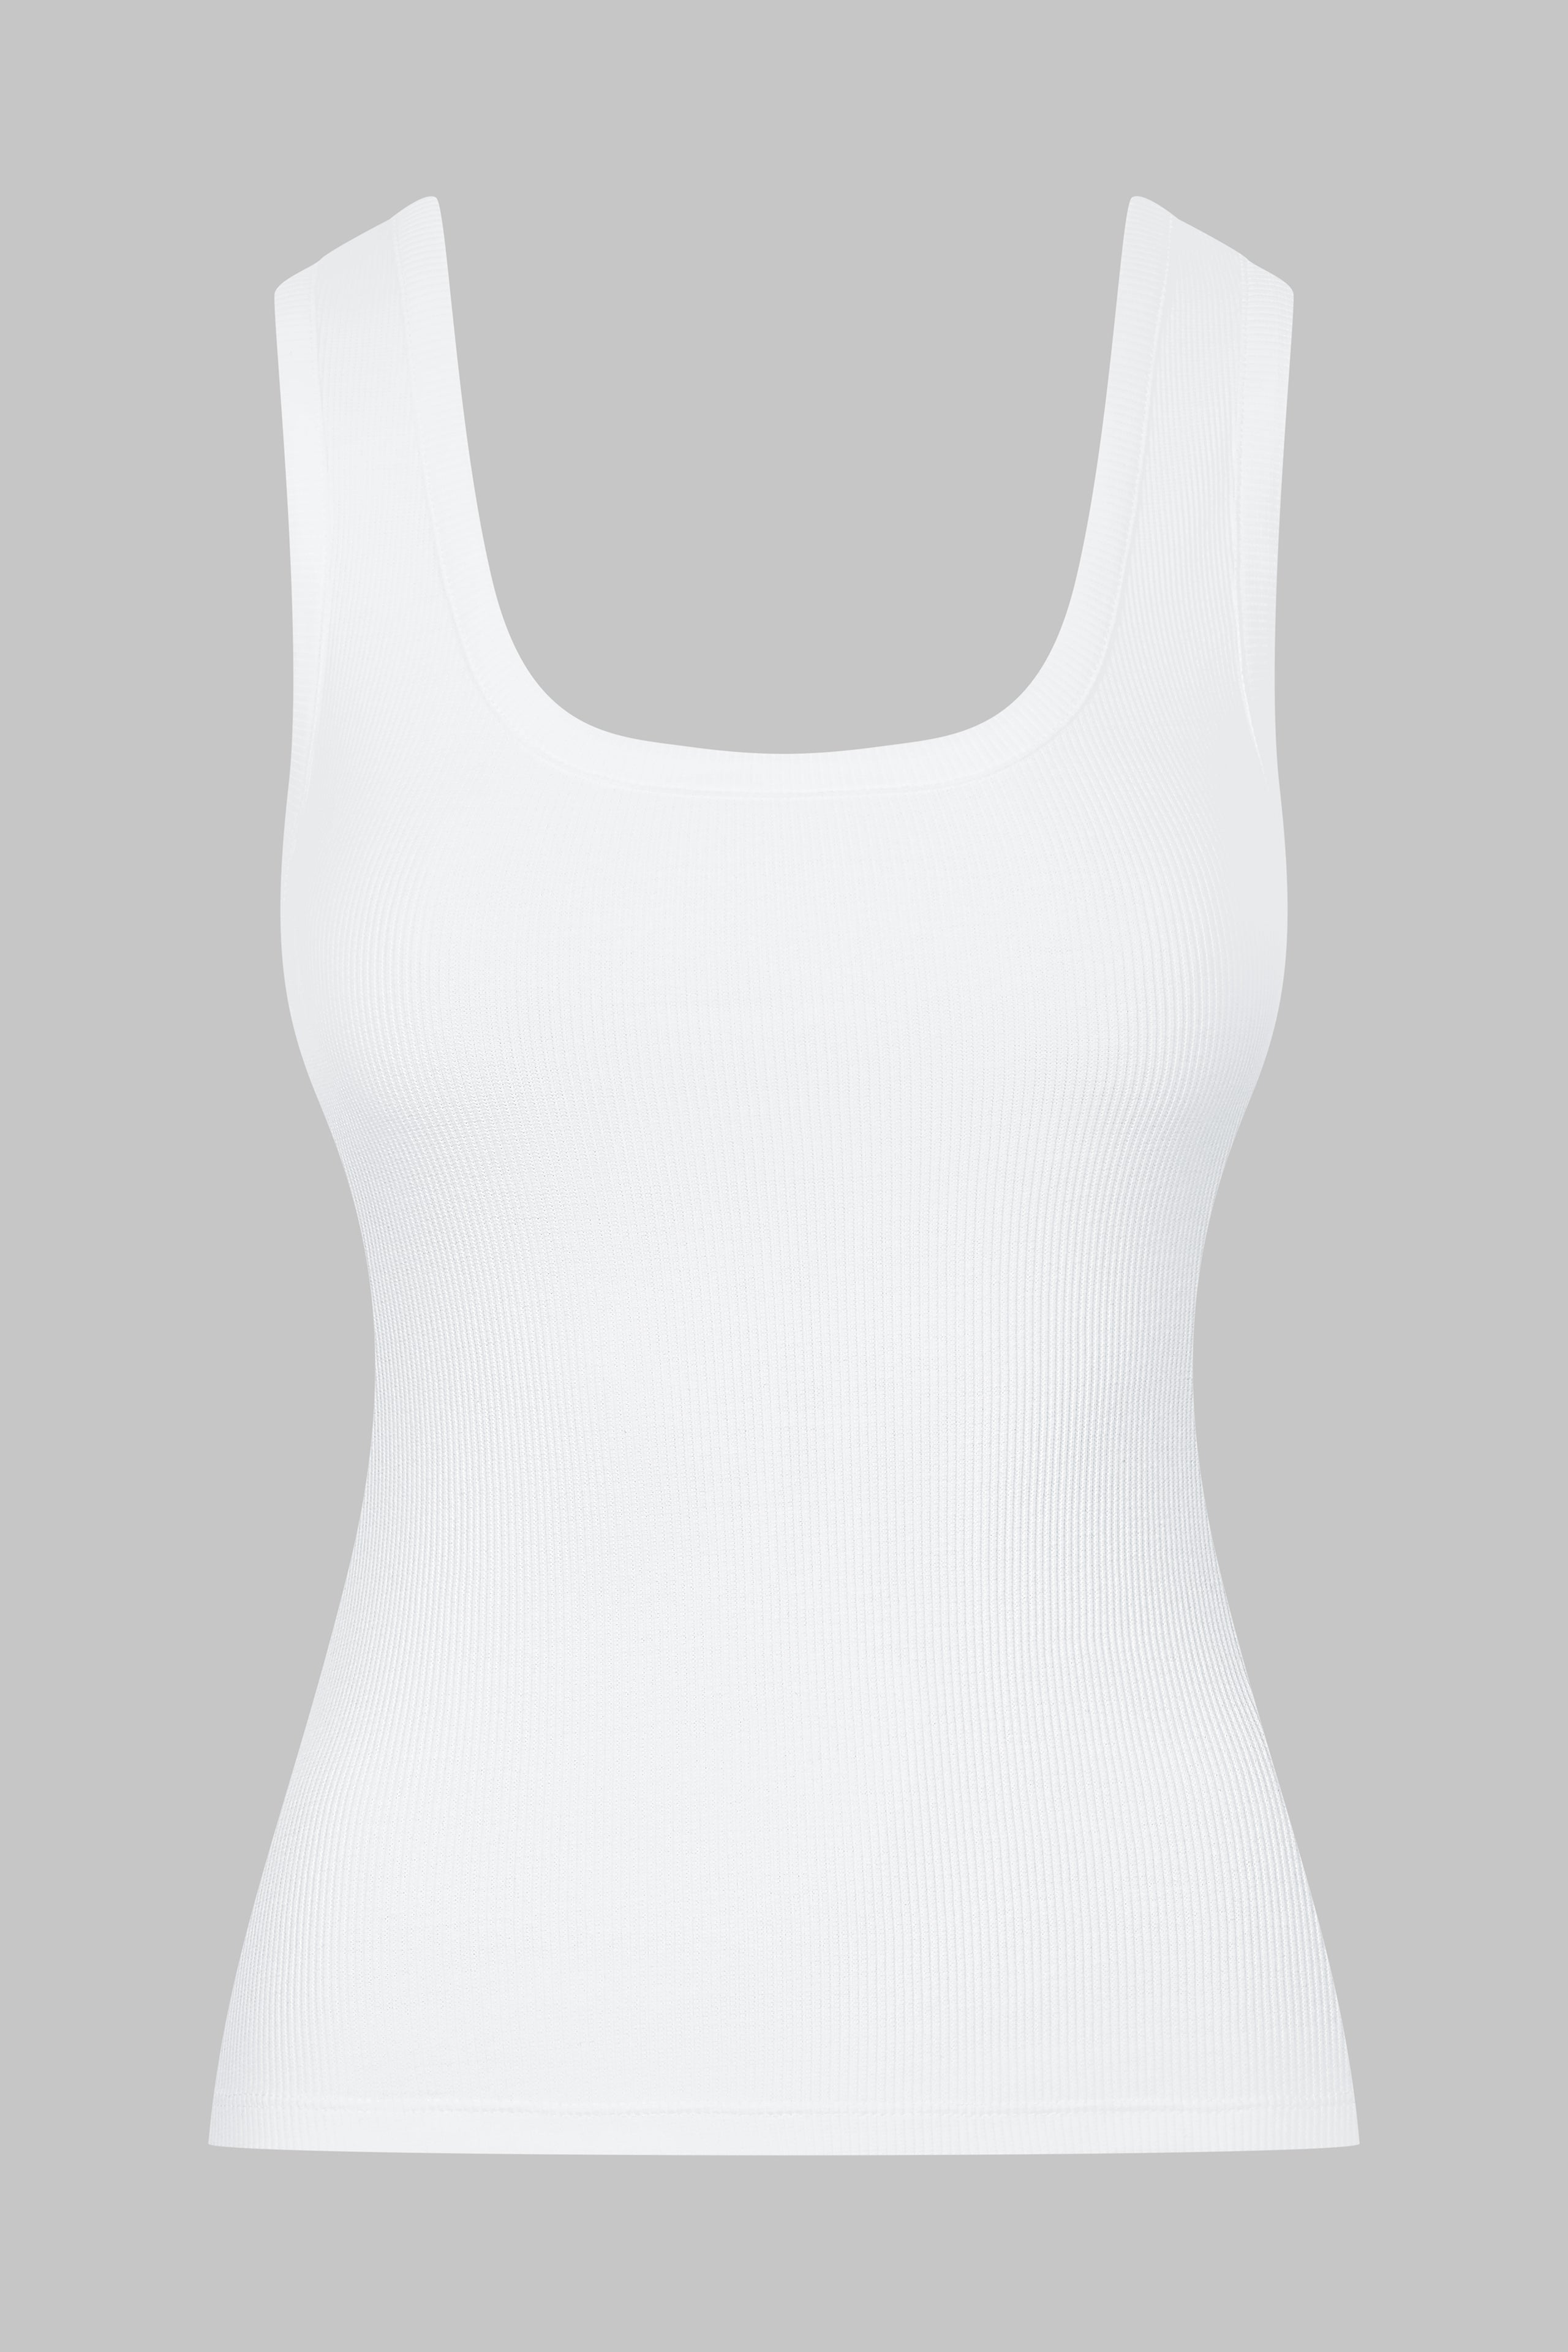 012 - Cotton tank top with gold logo